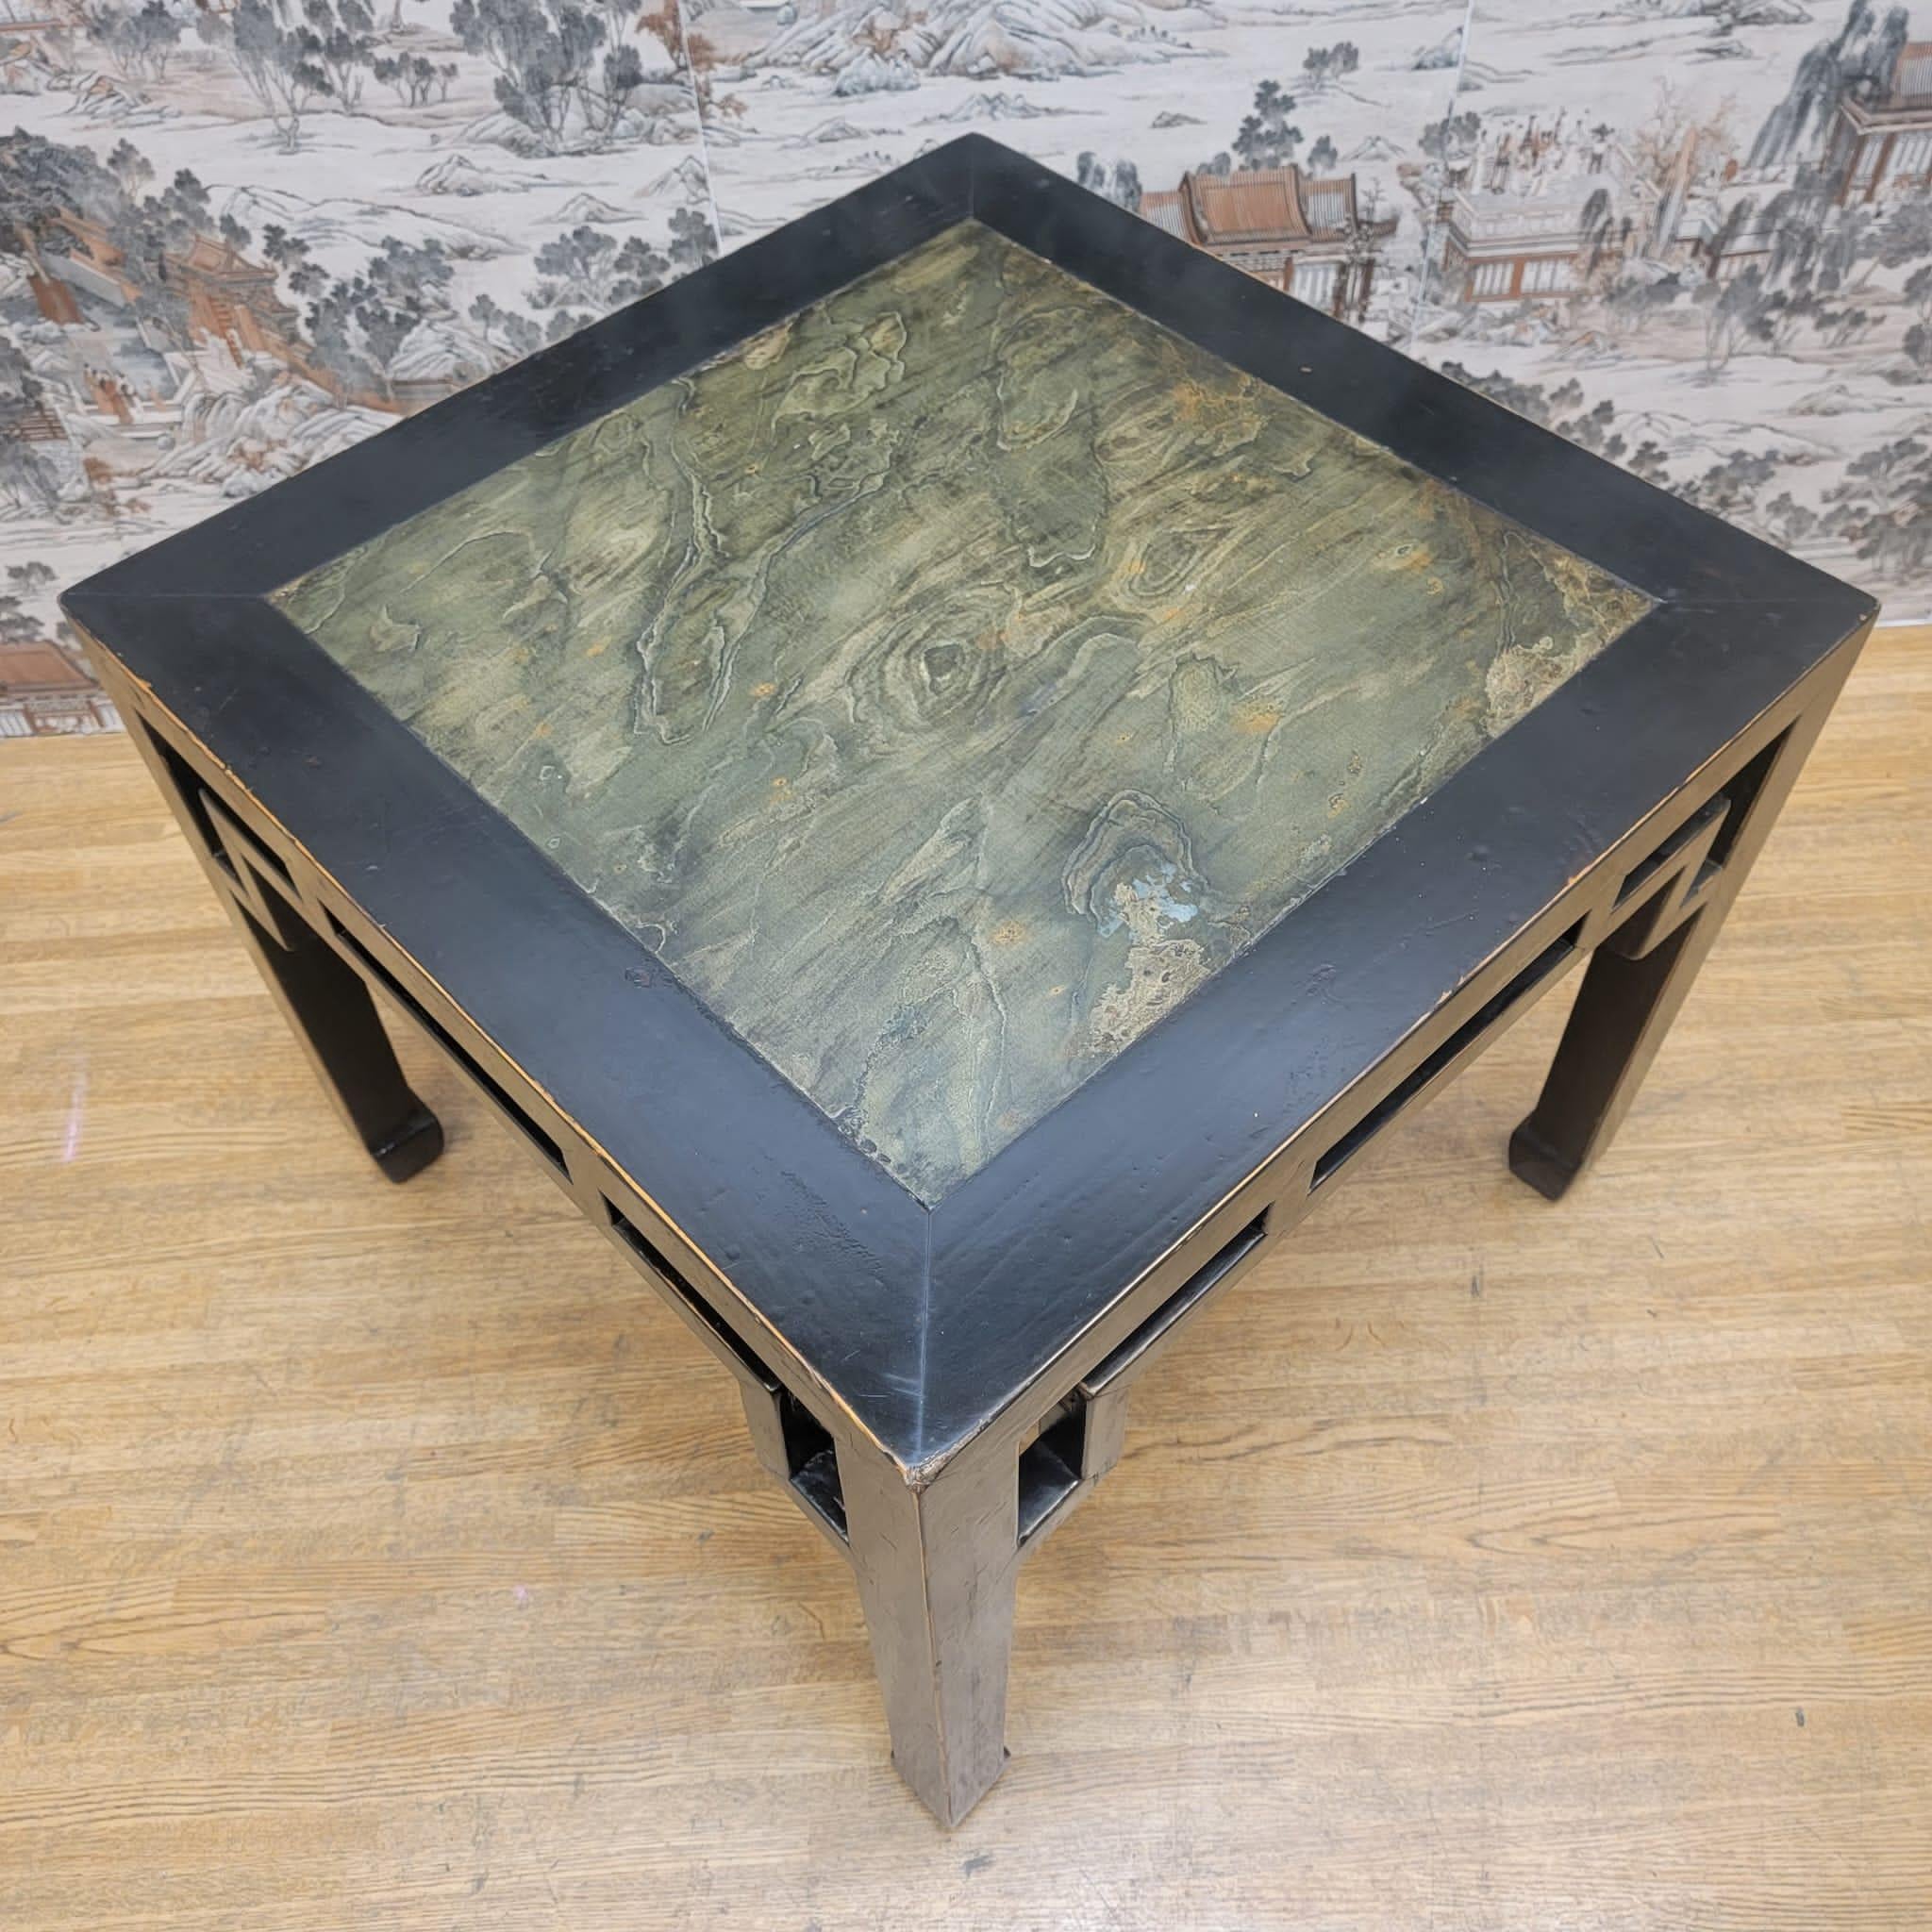 Antique Shanxi Province Elm Stone insert side table - pair

These rare pair of Shanxi Province elm tables have a stone insert. They are made of elm and have its original color and patina. 

Circa: 1880

Measures: H 23